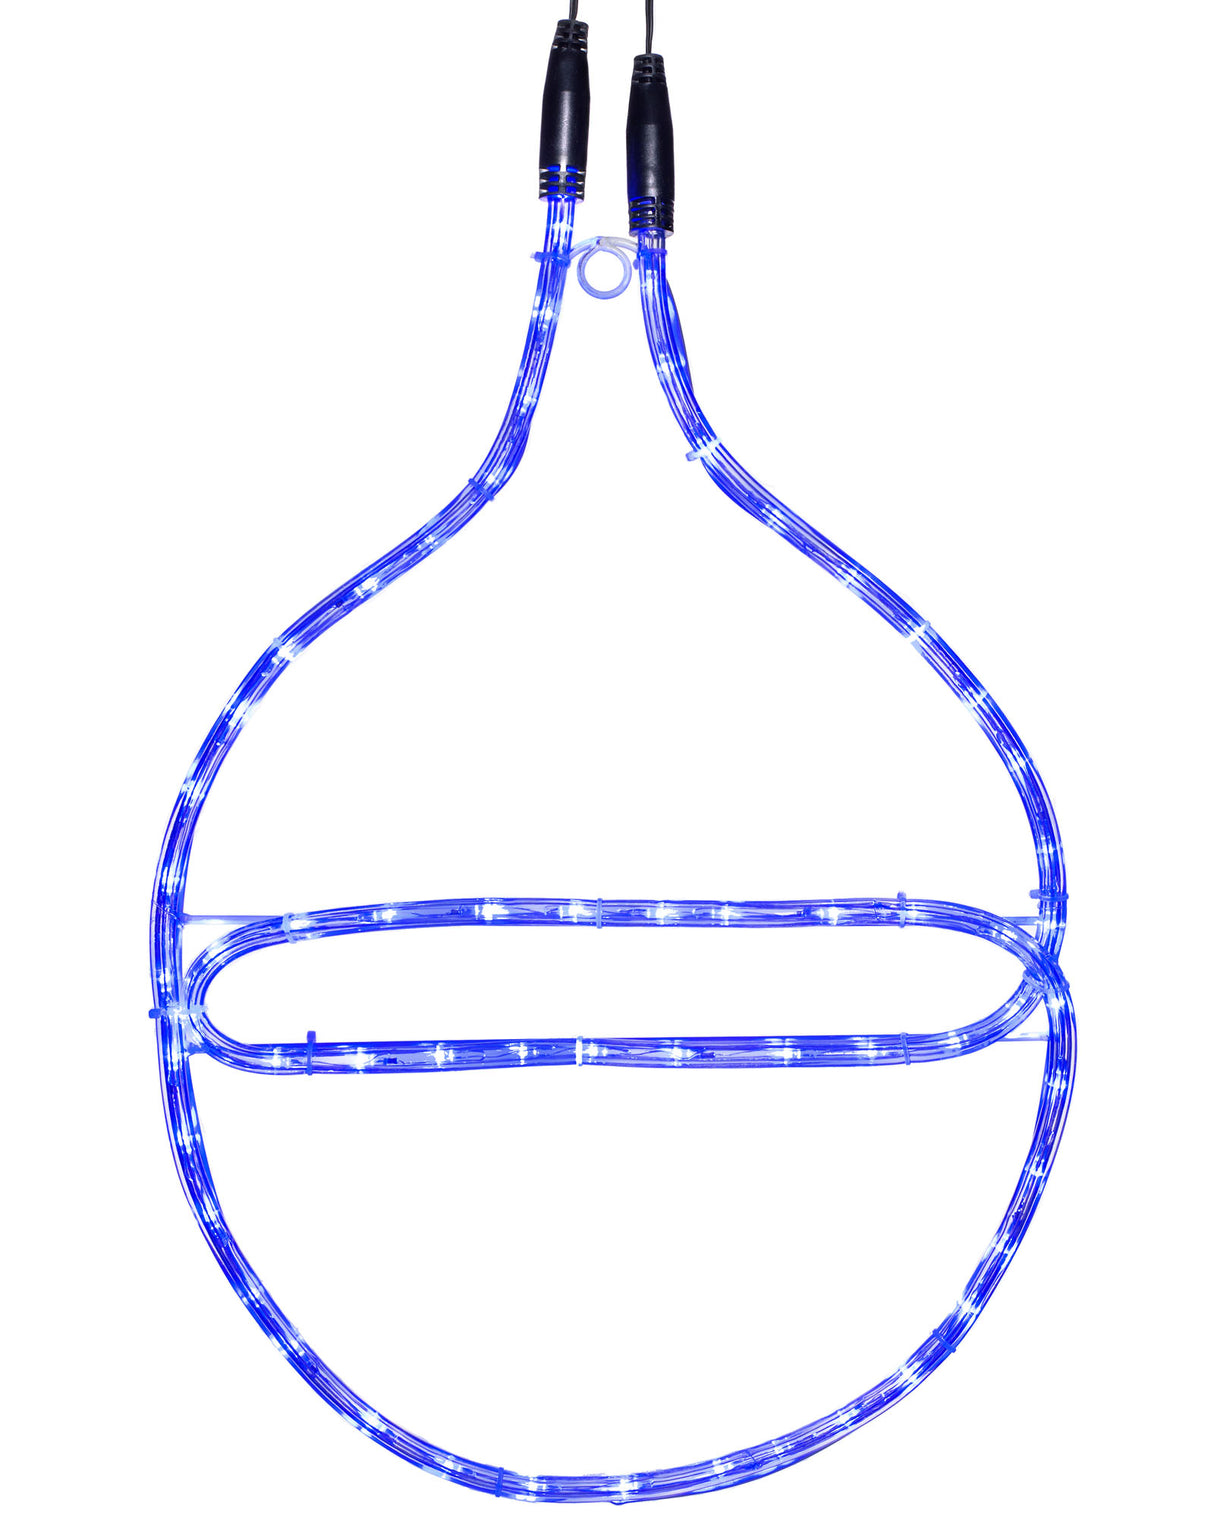 Connectable Bauble Rope Light Silhouette, Blue, 54cm